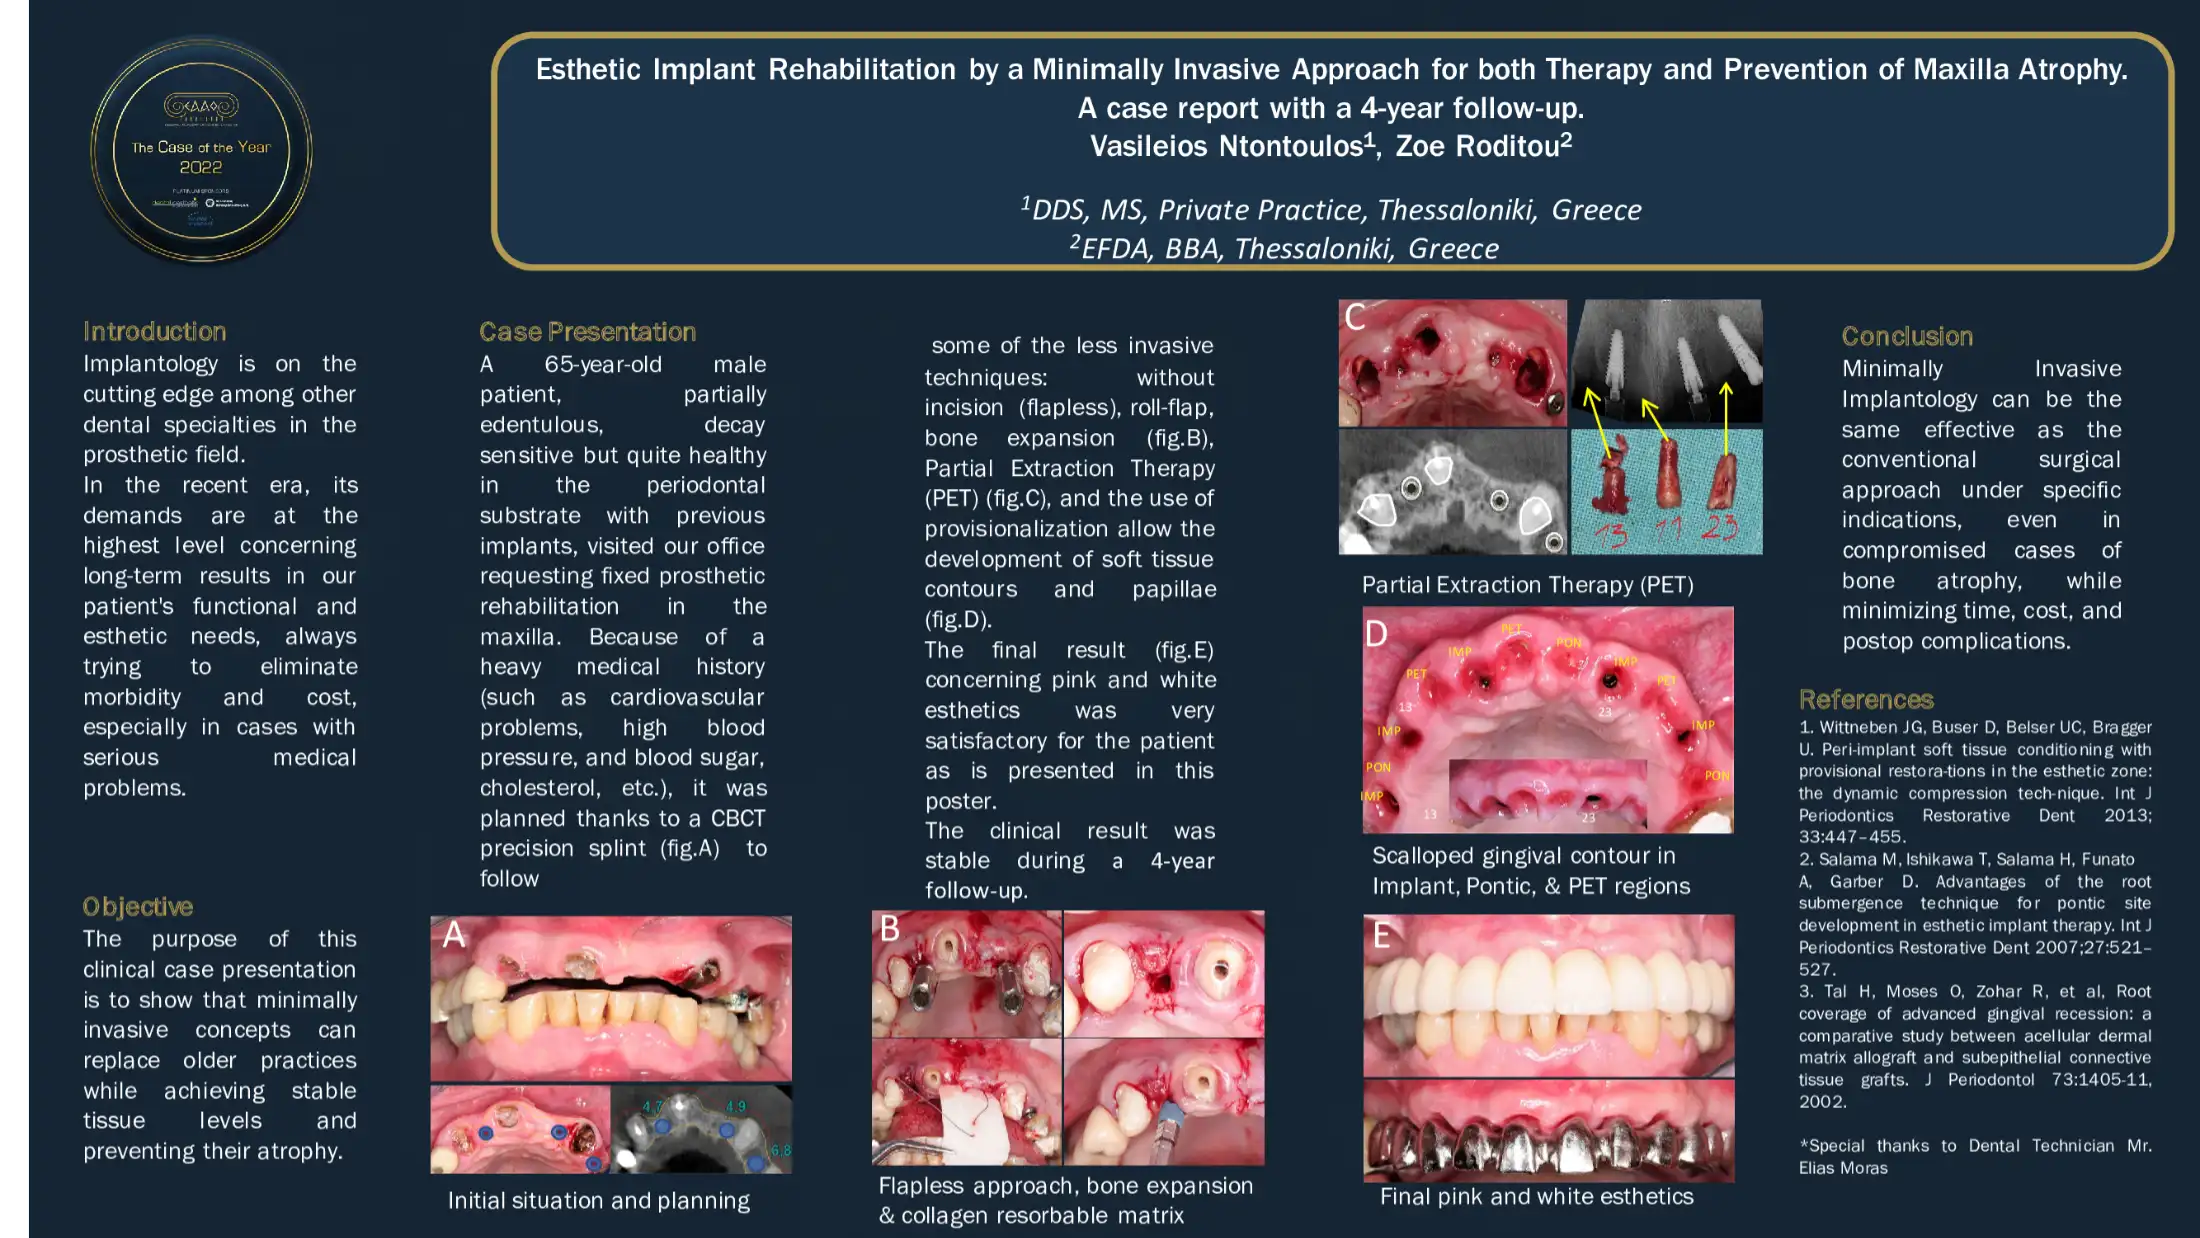 Esthetic Implant Rehabilitation by a Minimally Invasive Approach for both Therapy and Prevention of Maxilla Atrophy. A case report with a 4-year follow-up.